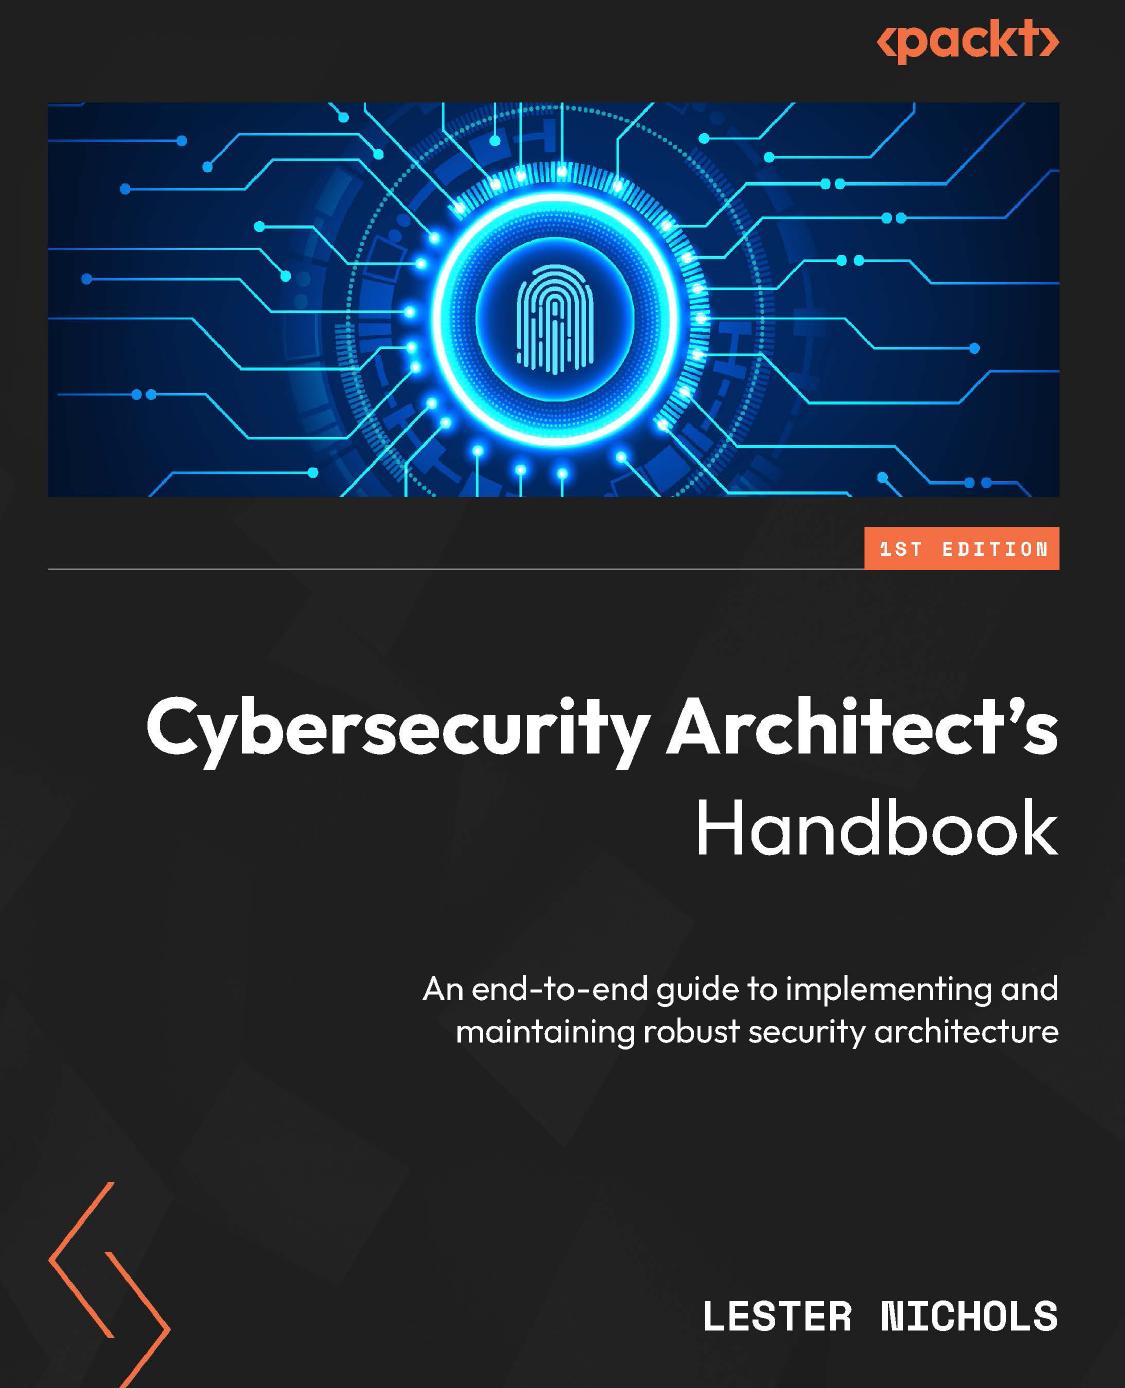 Cybersecurity Architect's Handbook: An End-To-End Guide to Implementing and Maintaining Robust Security Architecture